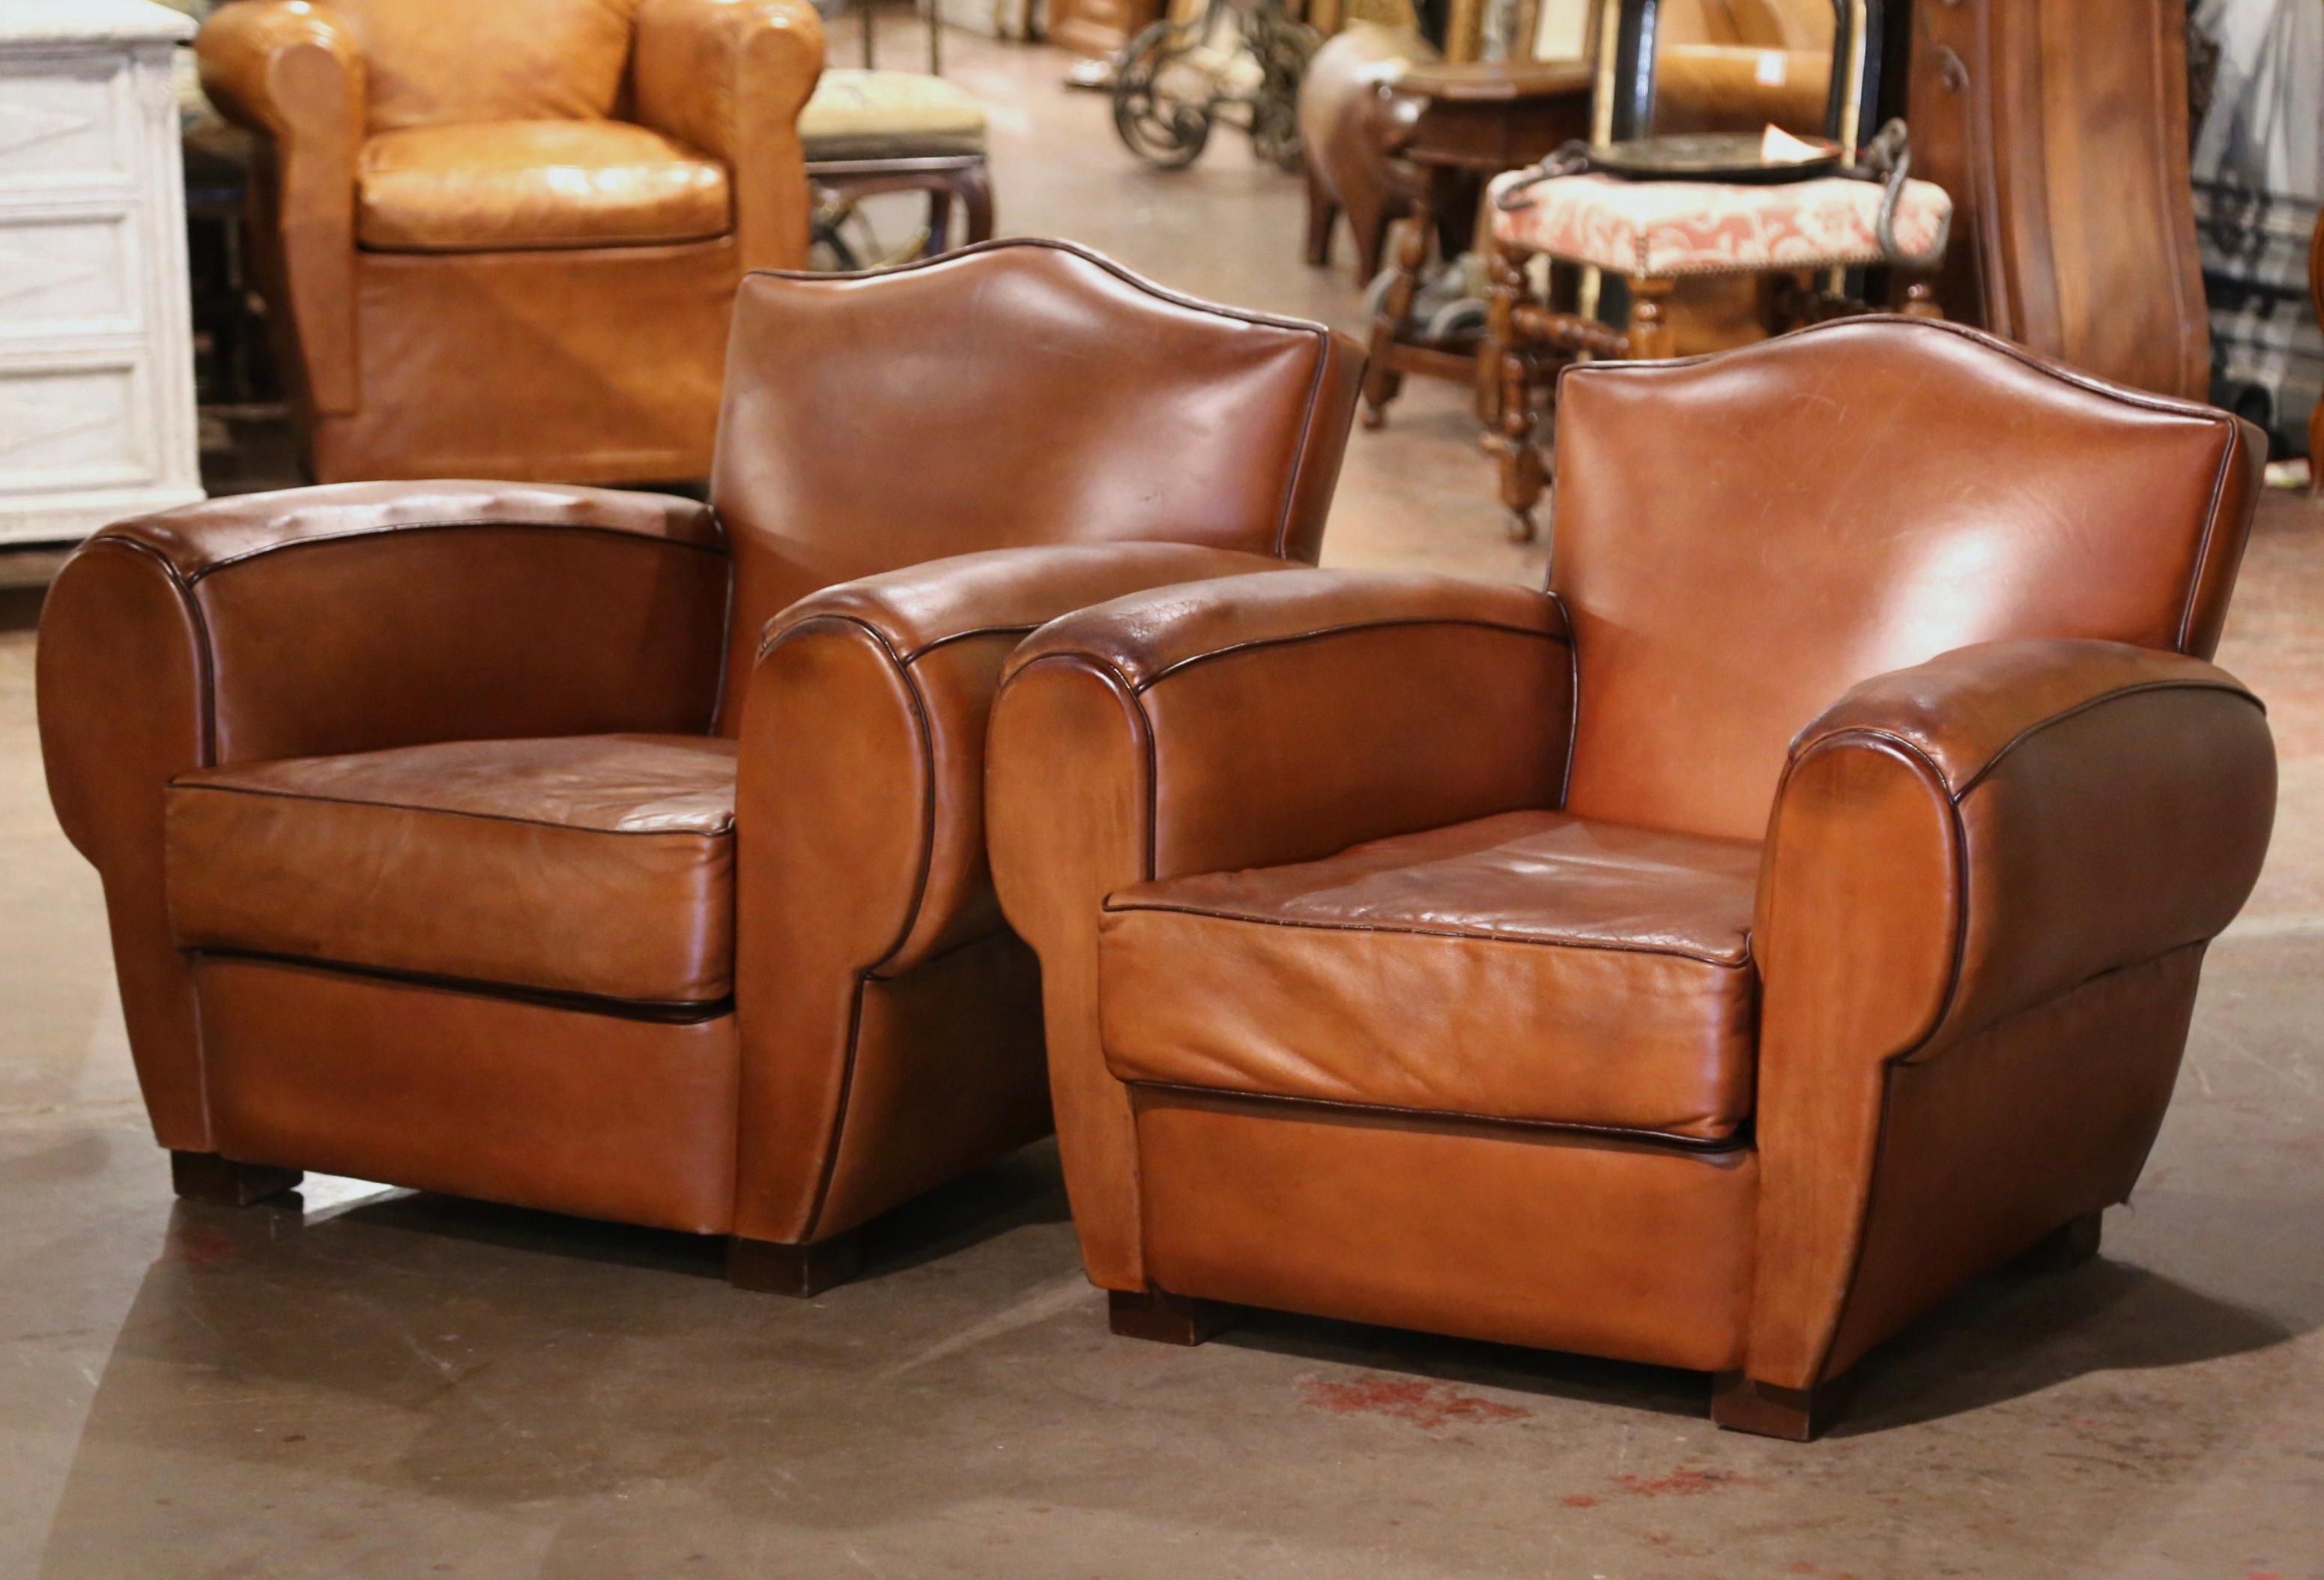 These Classic, antique Art Deco club chairs were crafted in France, circa 1920. The stately chairs feature wide, rounded armrests, a pitch back with an arched top shape, and square wooden feet at the base. The Classic, masculine French chairs with